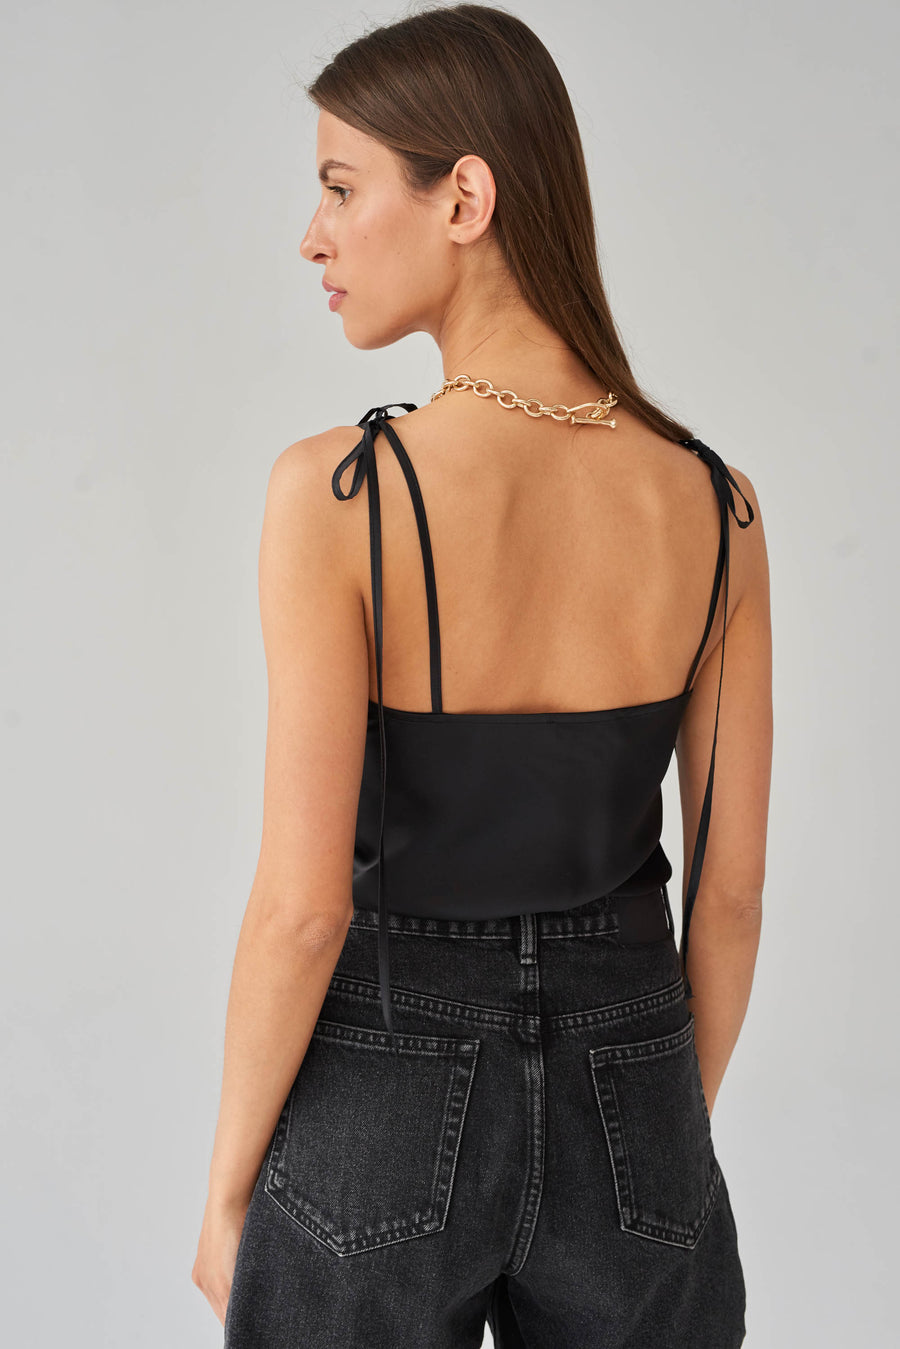 Silk satin top with adjusted tie-straps in black